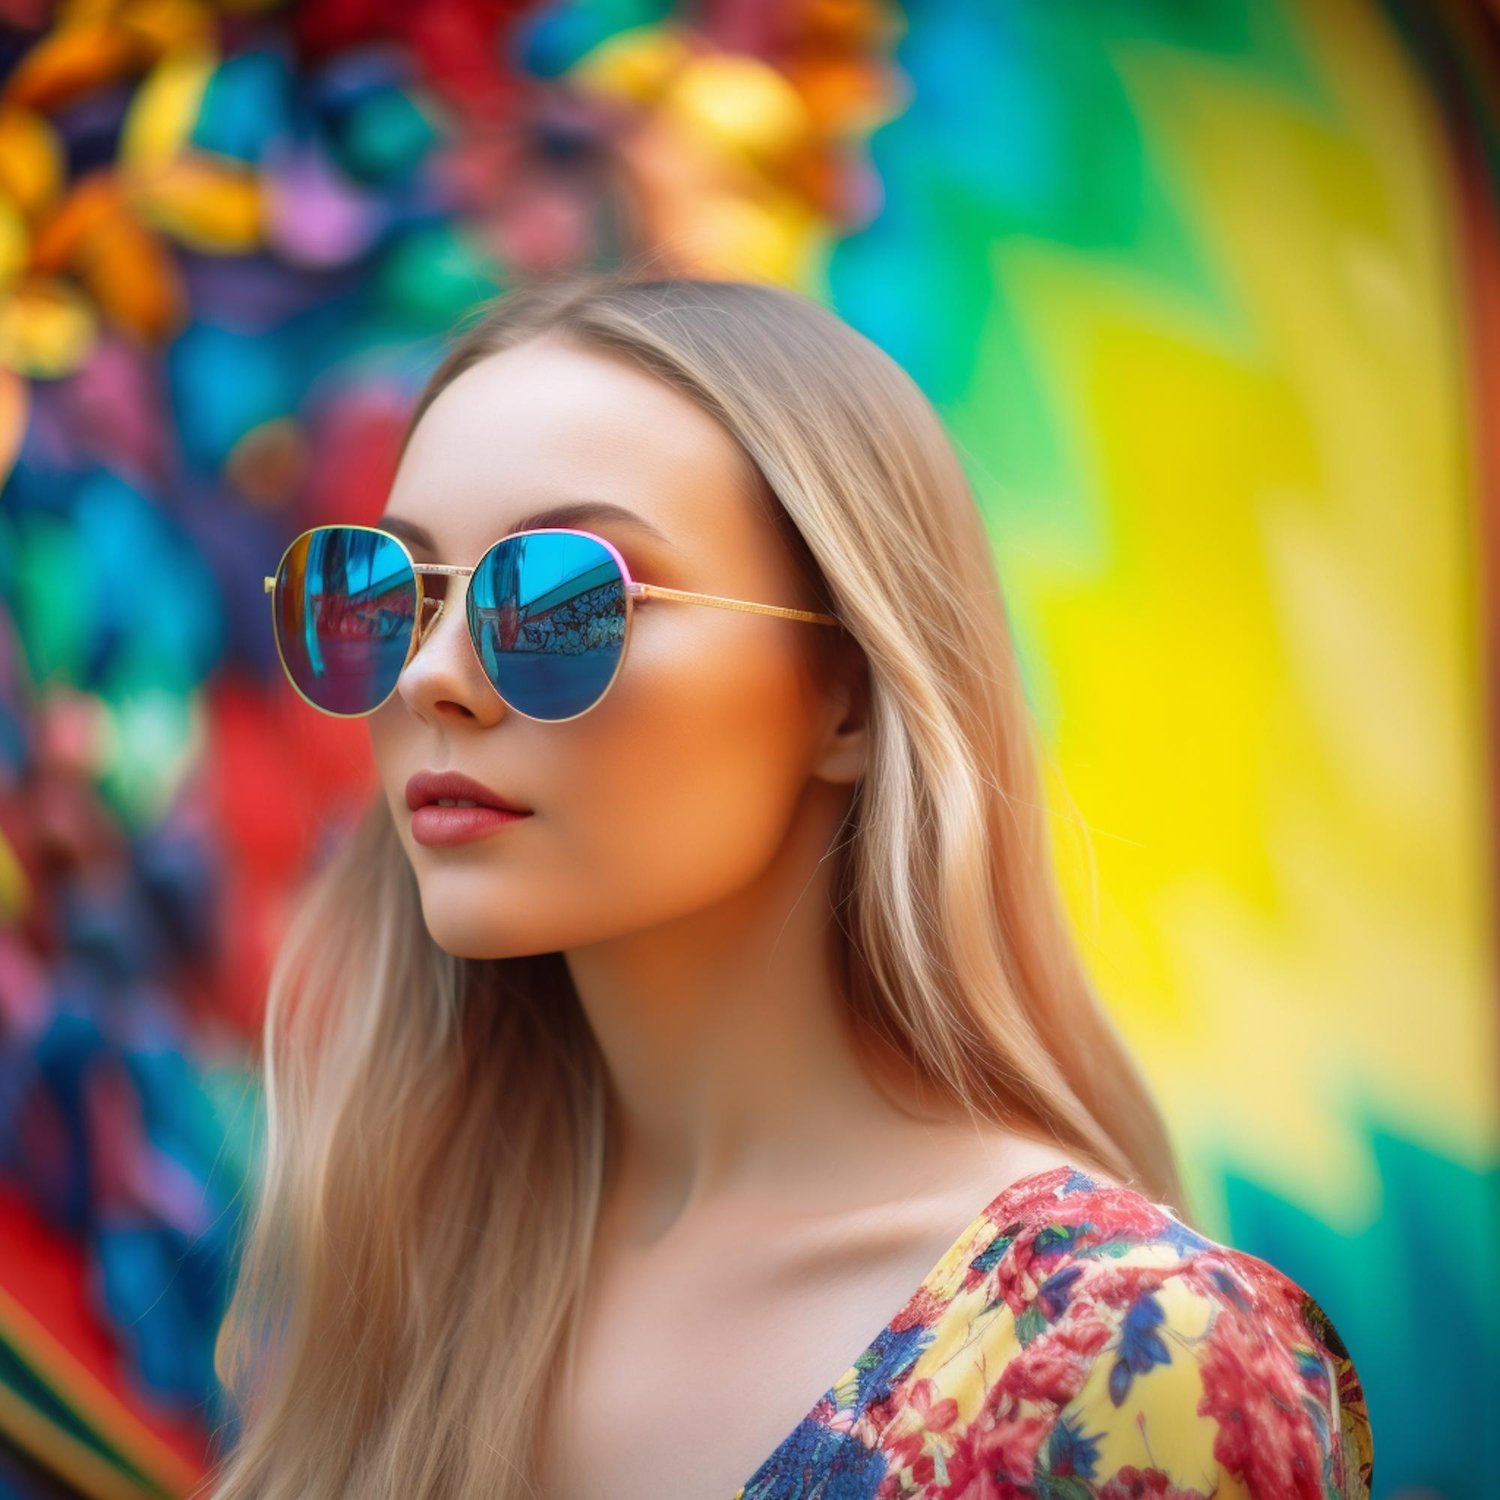 Woman with reflective blue sunglasses against a colorful background